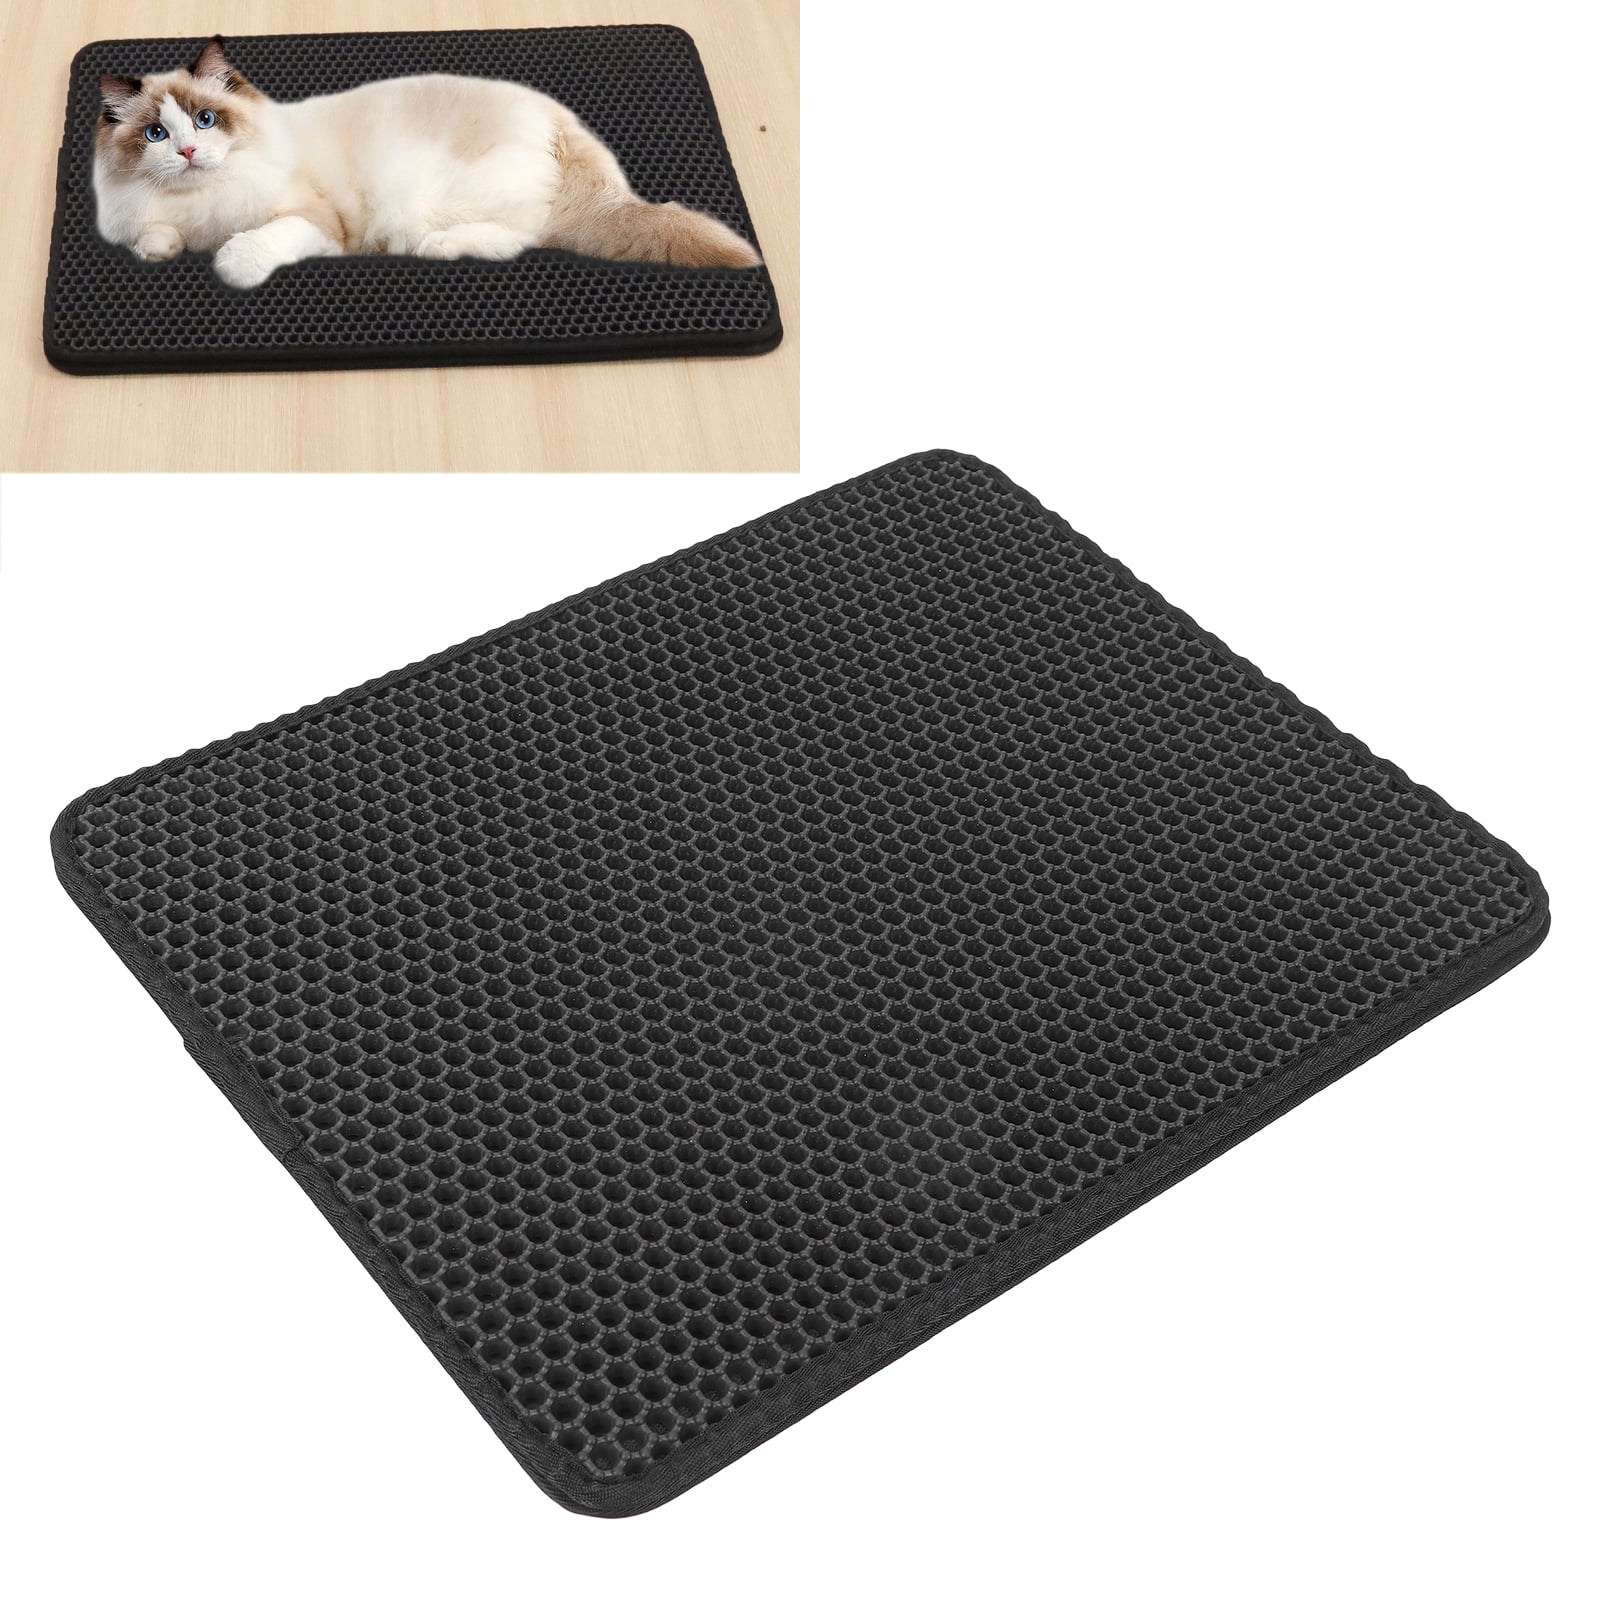 black, L Litter Catcher Pad Soft AntiSlip Double Layer Professional for Cats Kitten NITRIP Scatter Control Pad